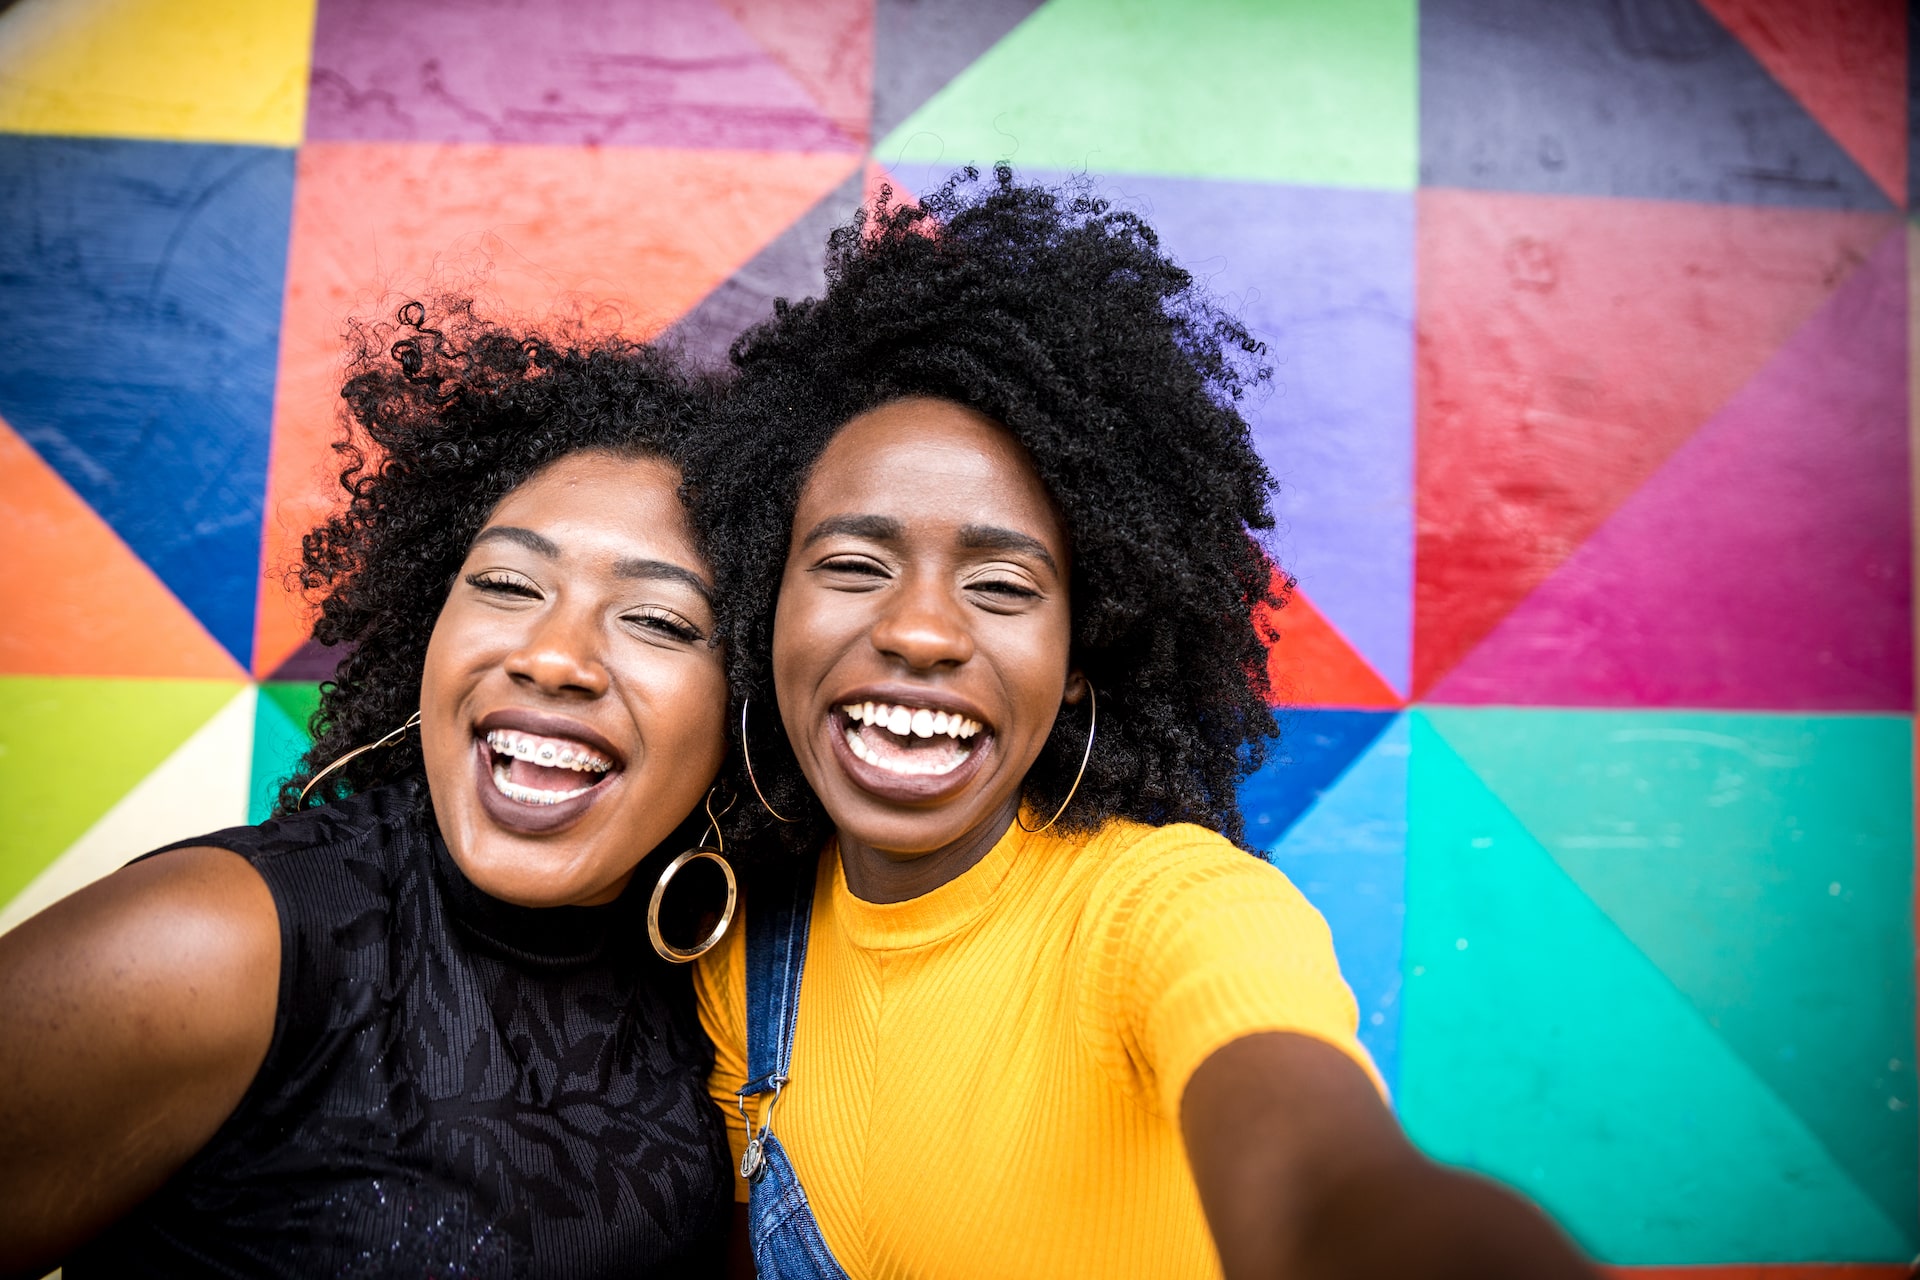 two women smiling and laughing in front of colorful wall